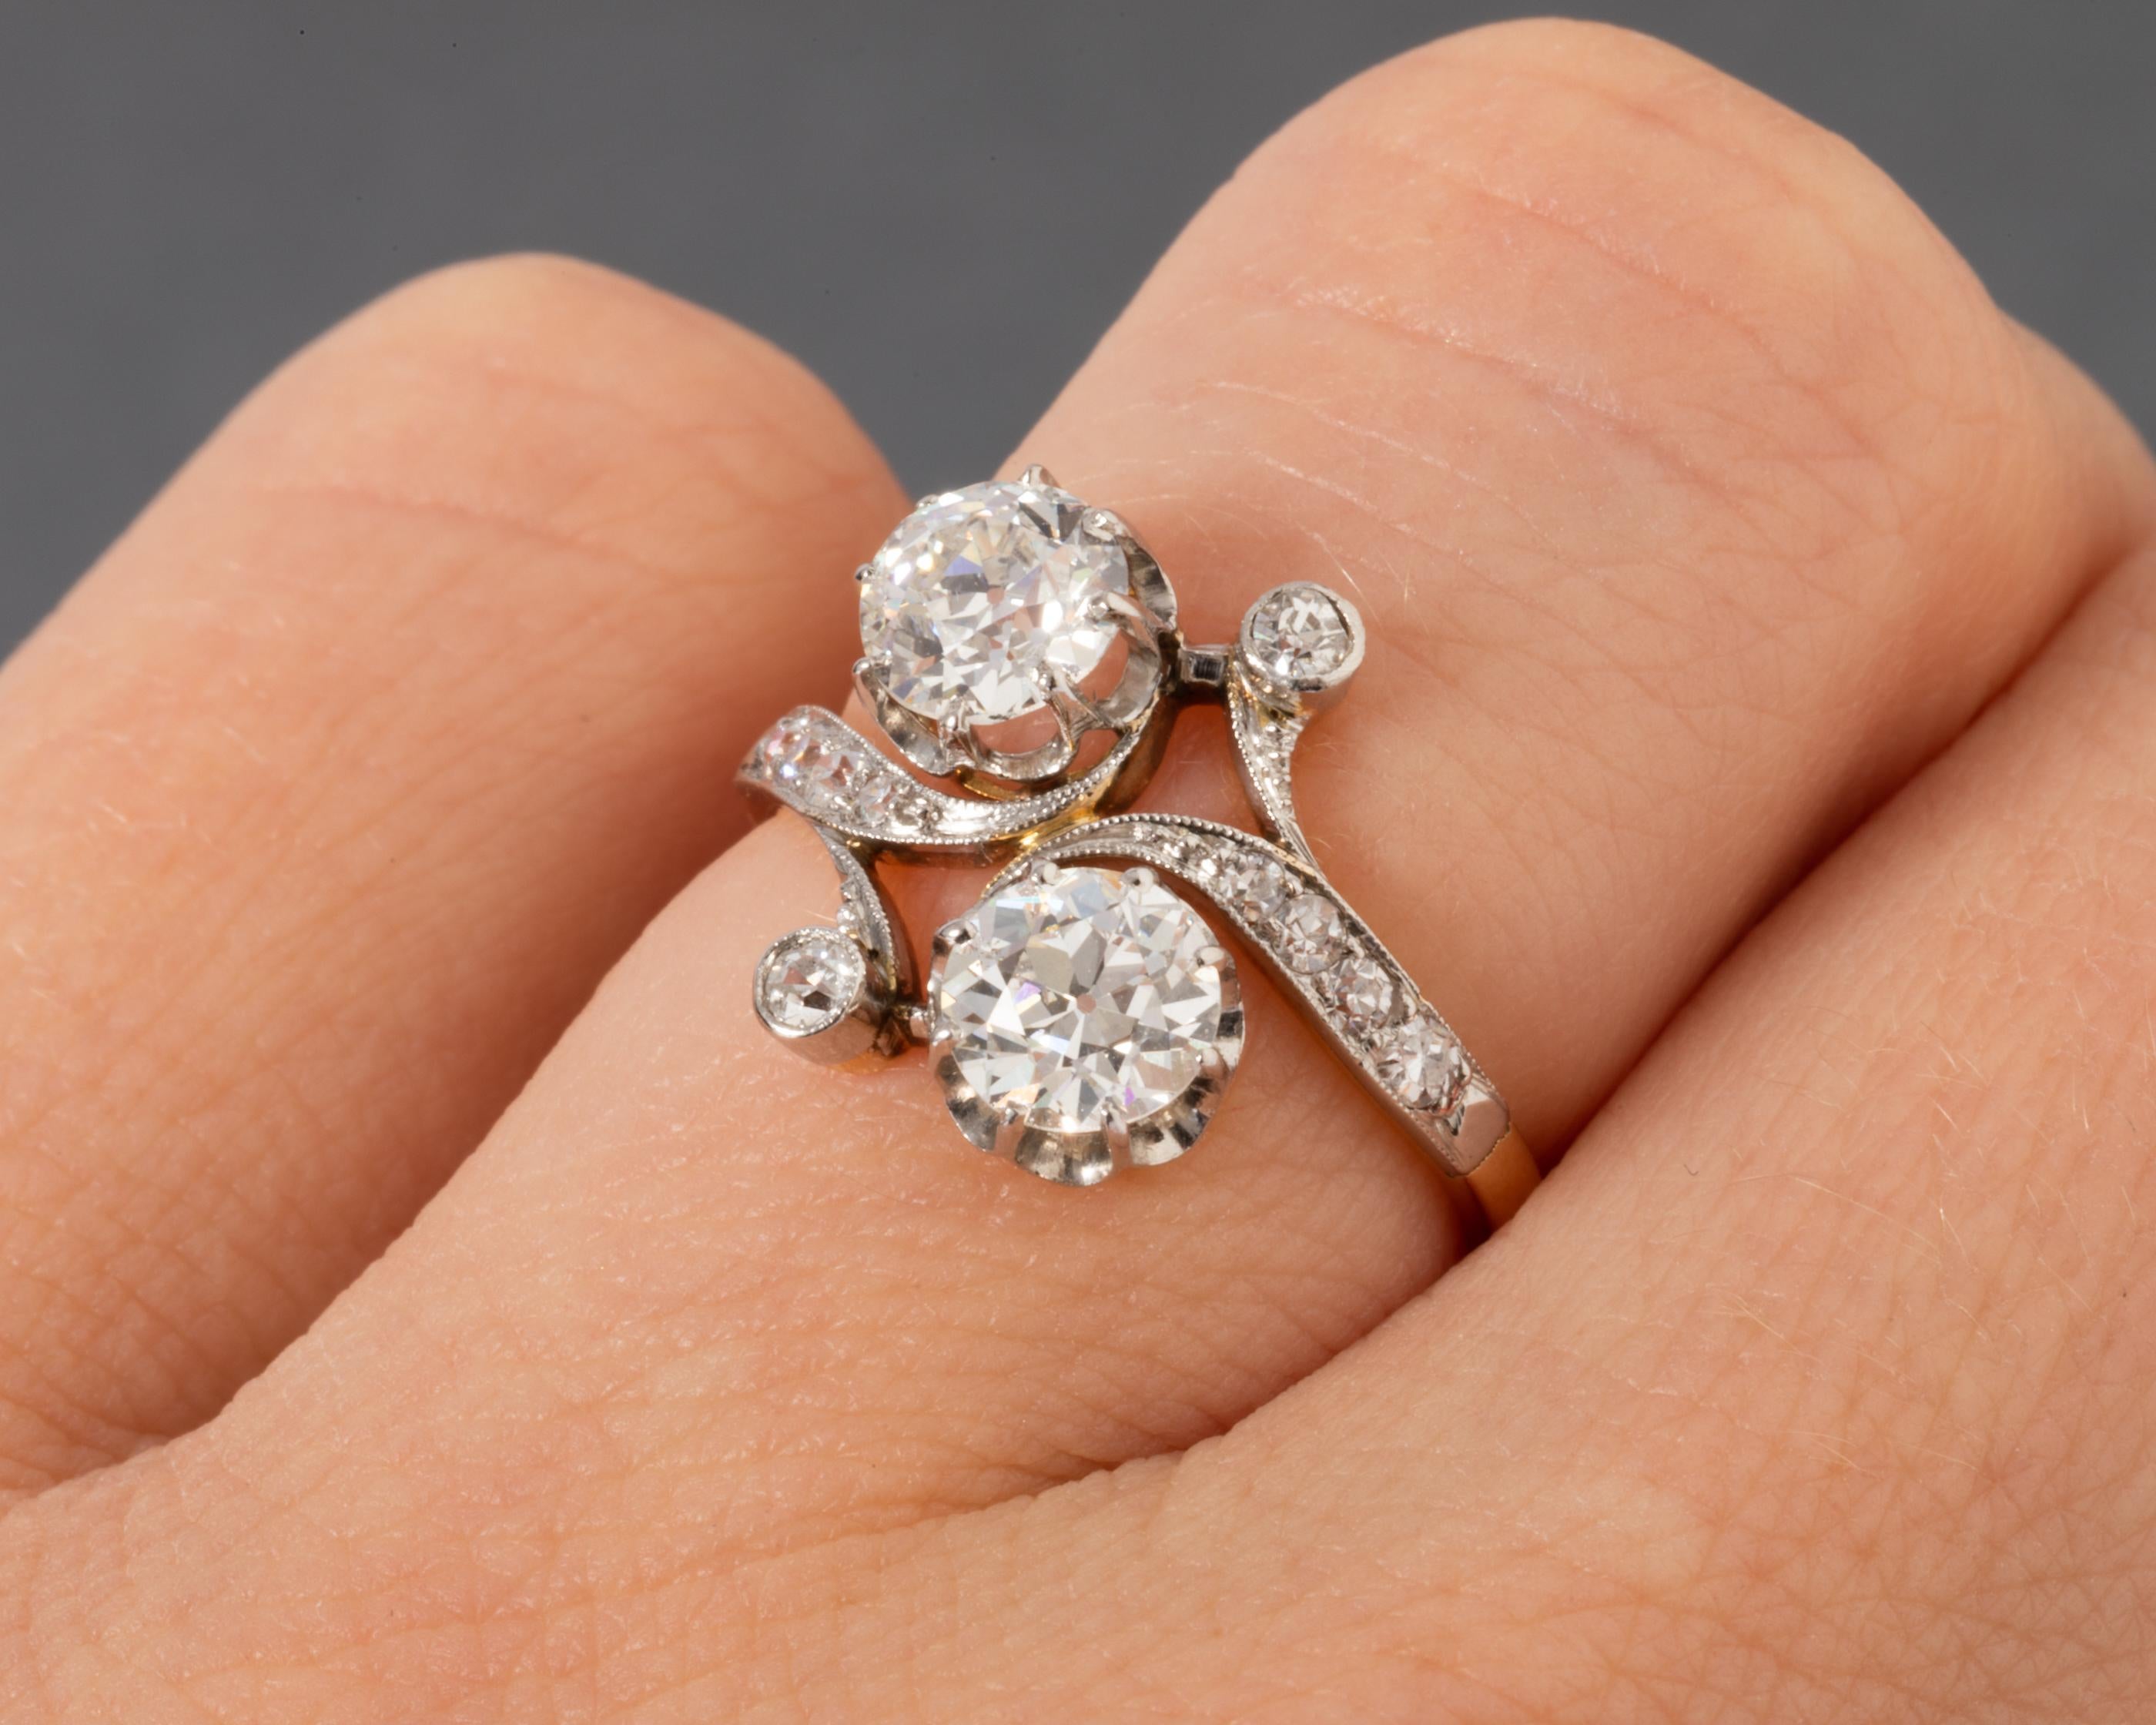 Very lovely ring, made in France circa 1900.
The two principal diamonds are very good quality old European cut diamonds. They weight 0.60 carats each approximately. They are very white G/H color and very clear, vs1 clarity estimate.
French hallmark